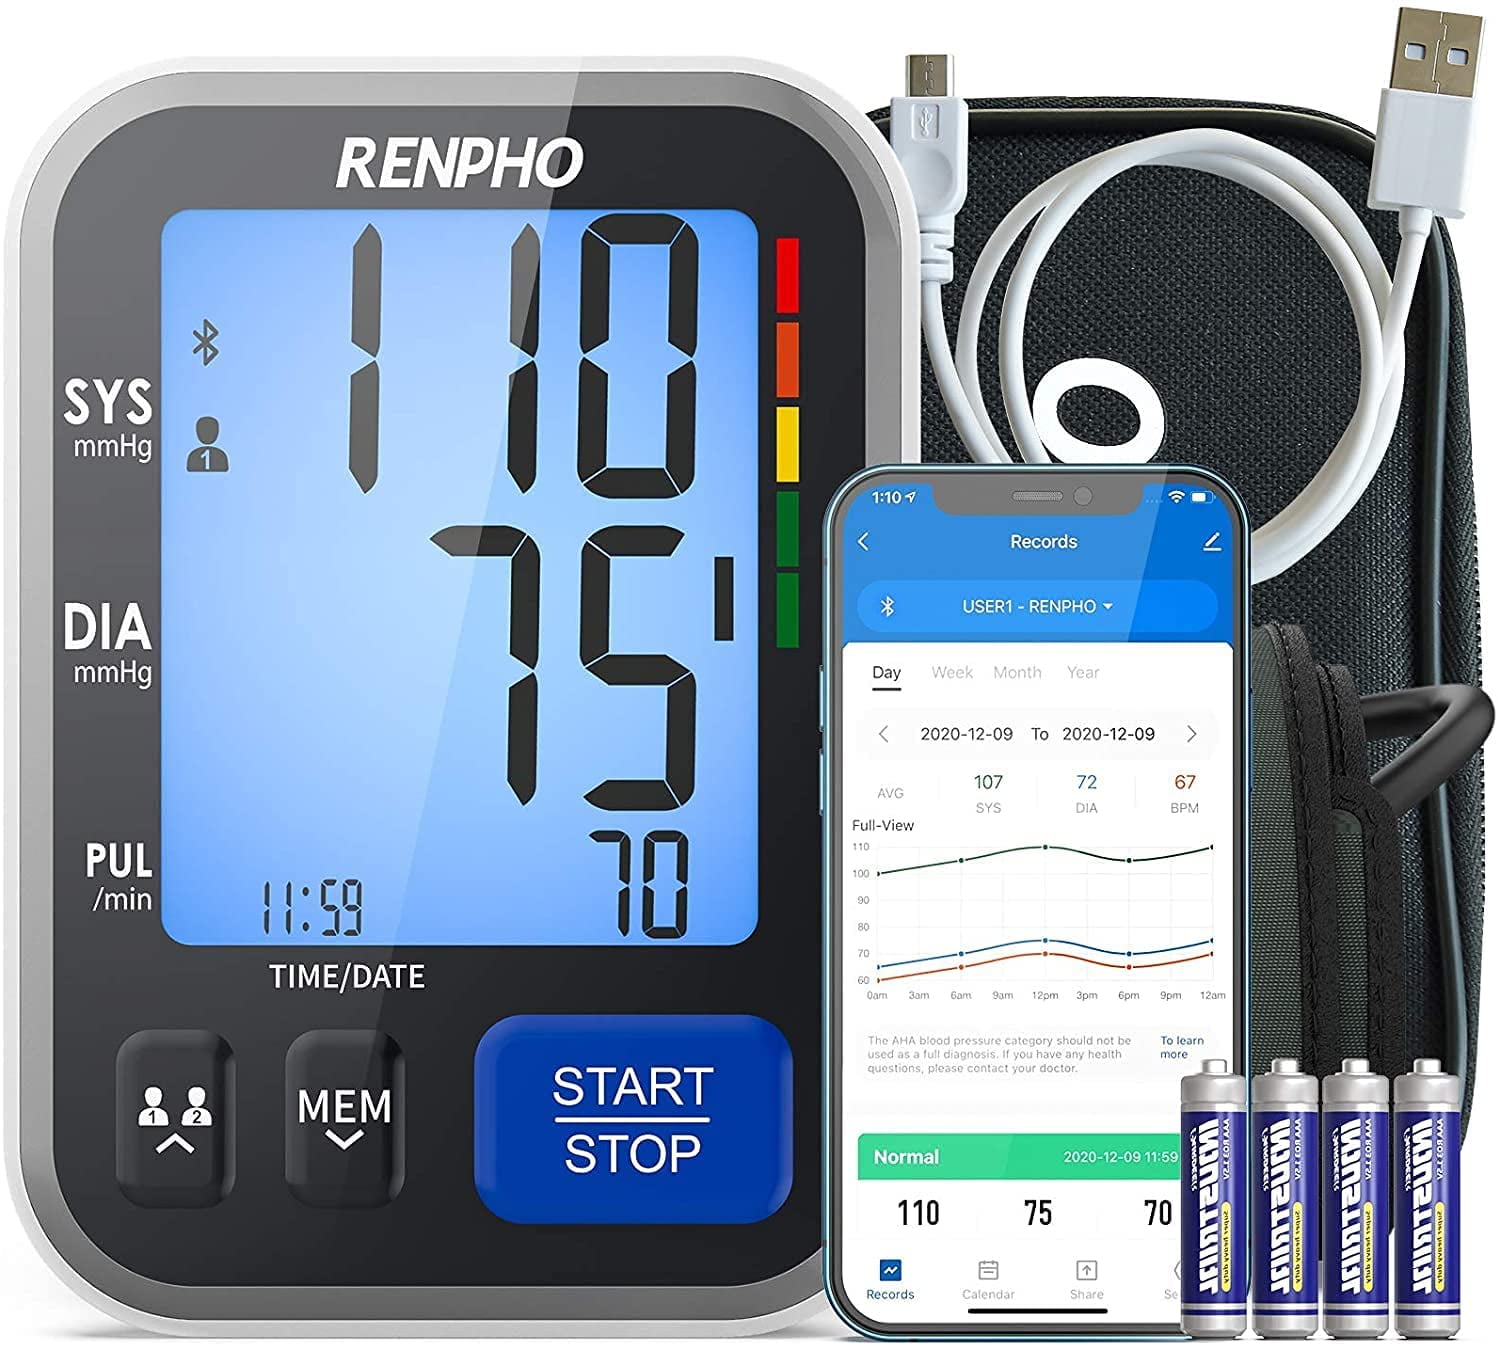 Renpho RP-BPM003 Upper Arm Blood Pressure Monitor only $14.99